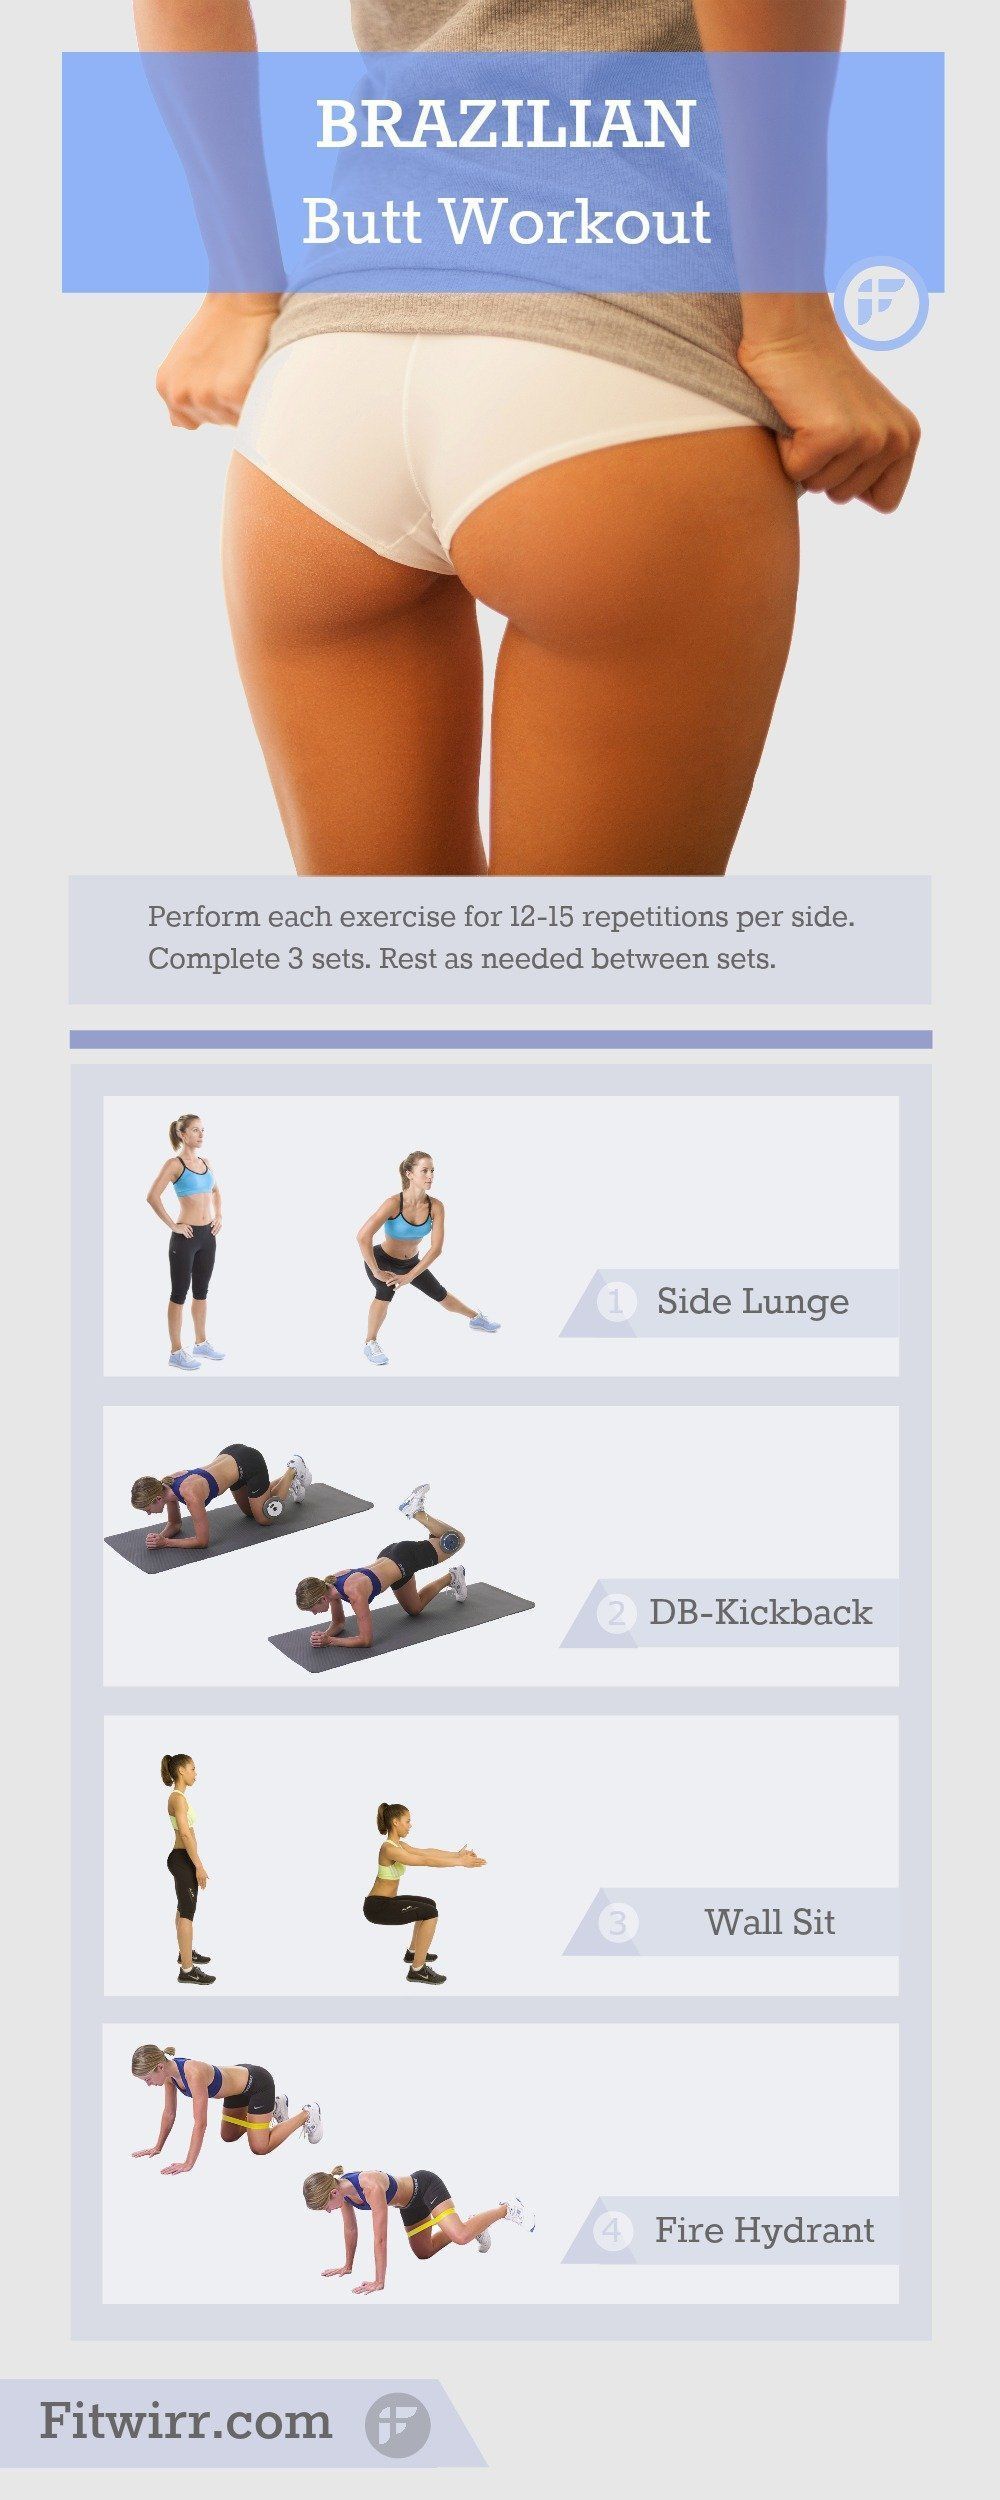 Exercises for the butt